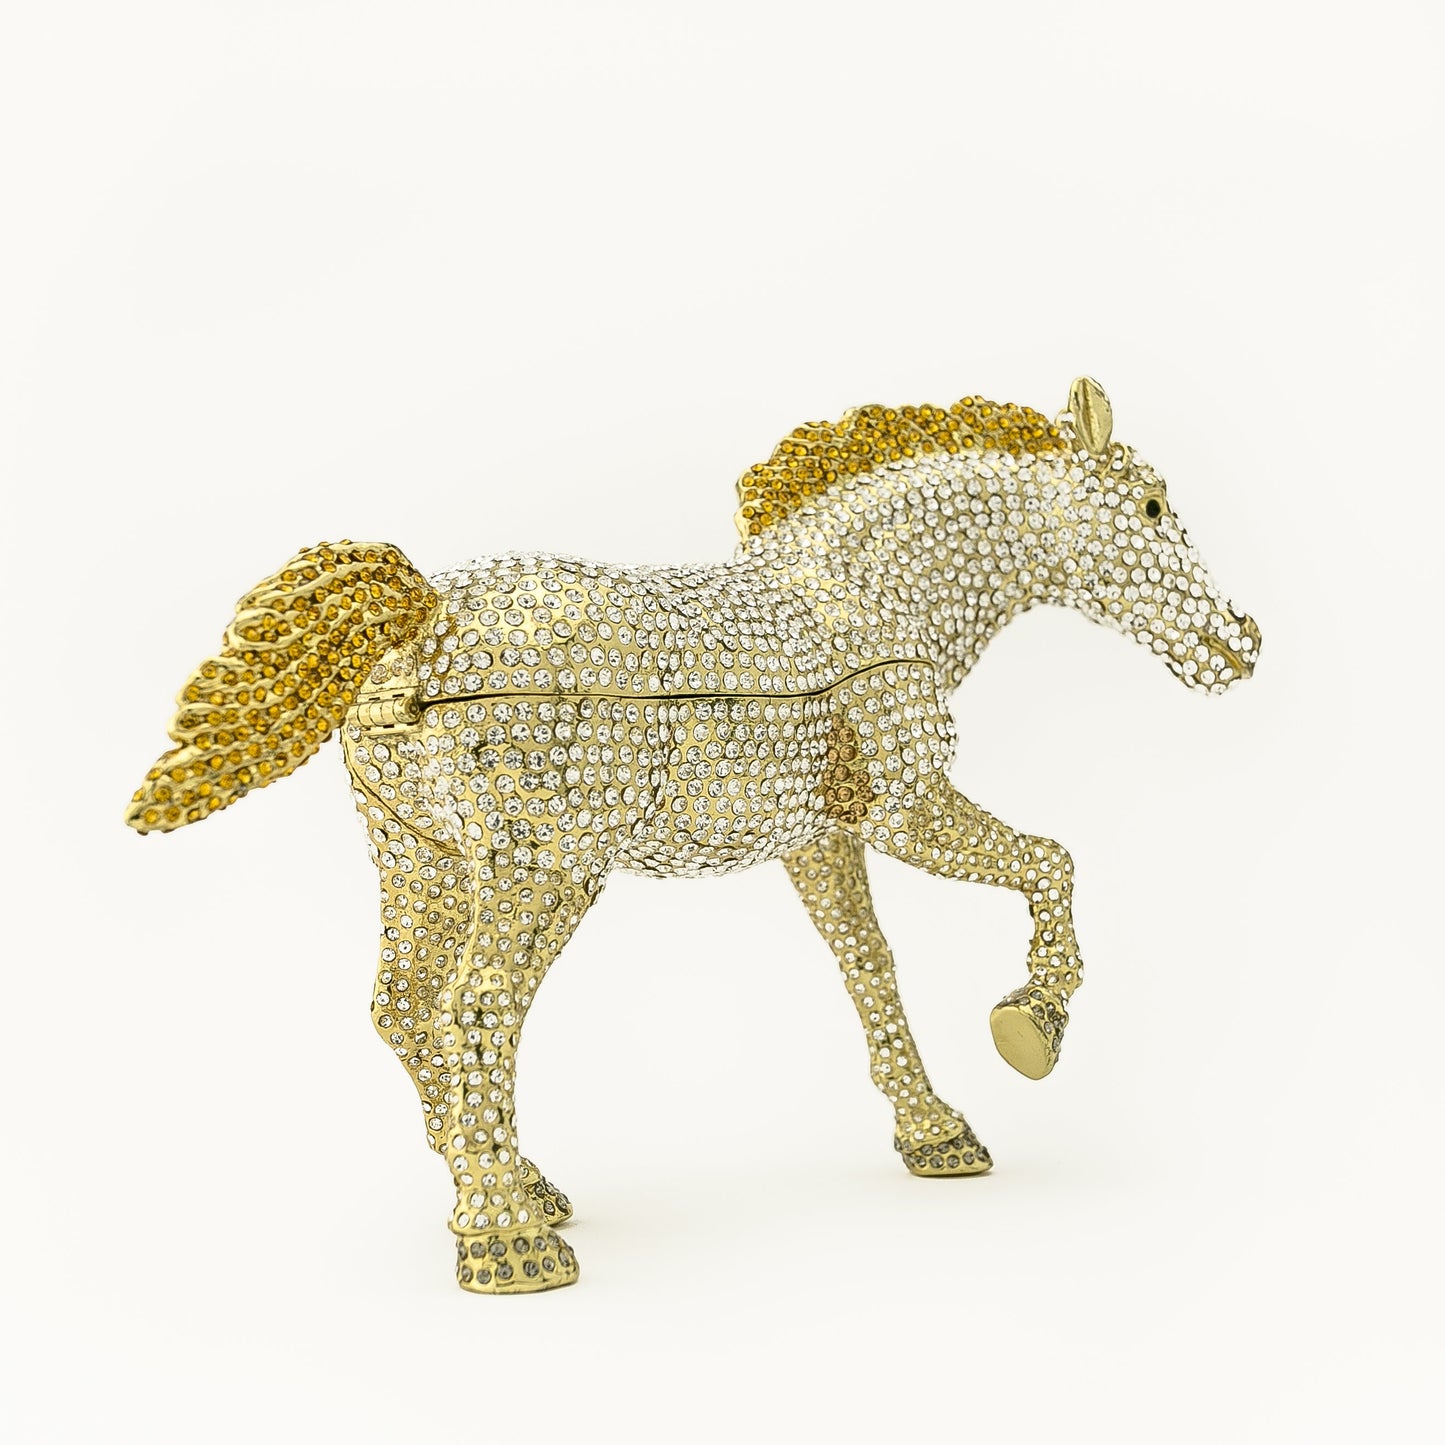 Large Golden Horse Decorated with White Crystals